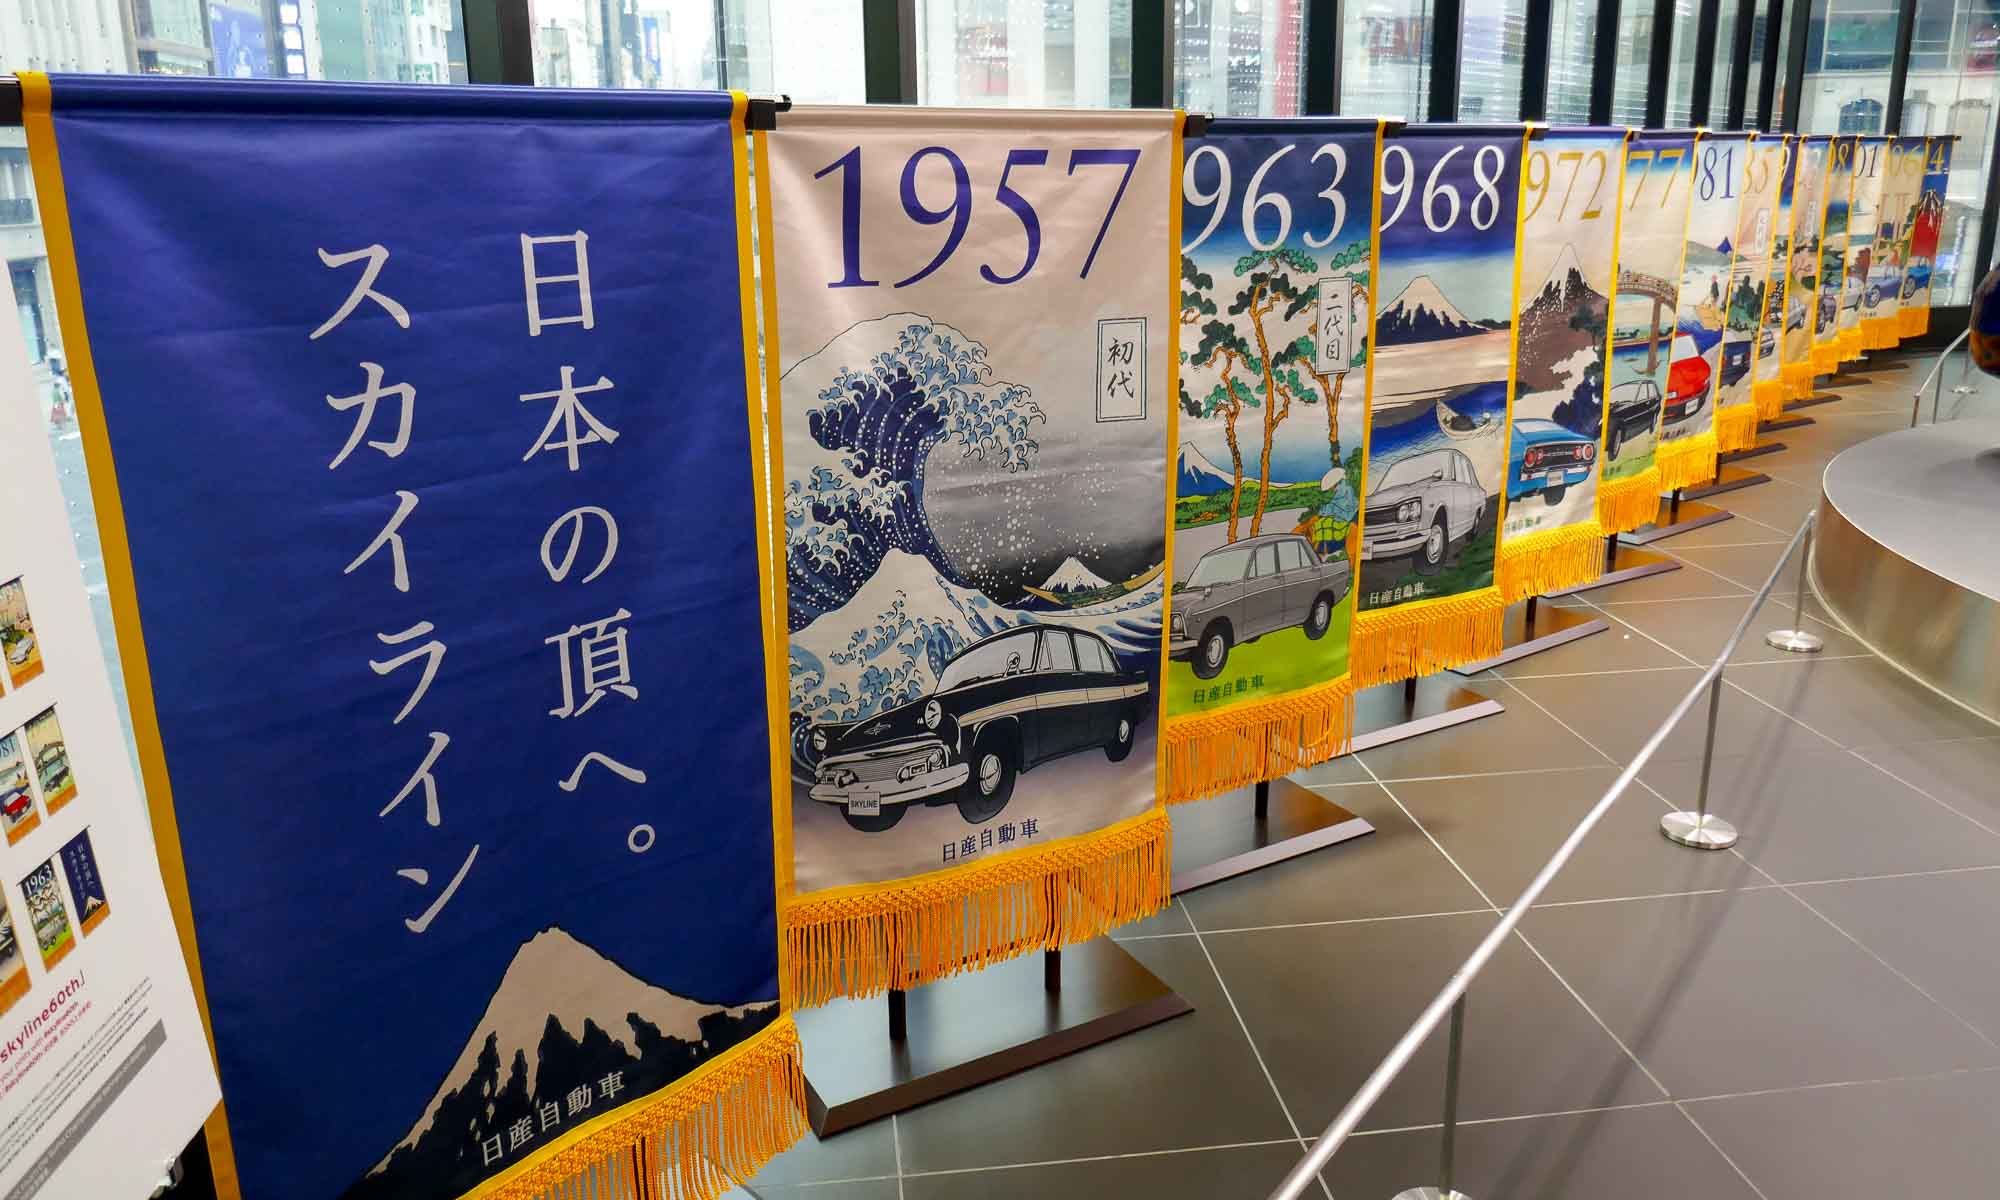 Sumo championship banners commemorating the 60th anniversary of the Nissan Skyline